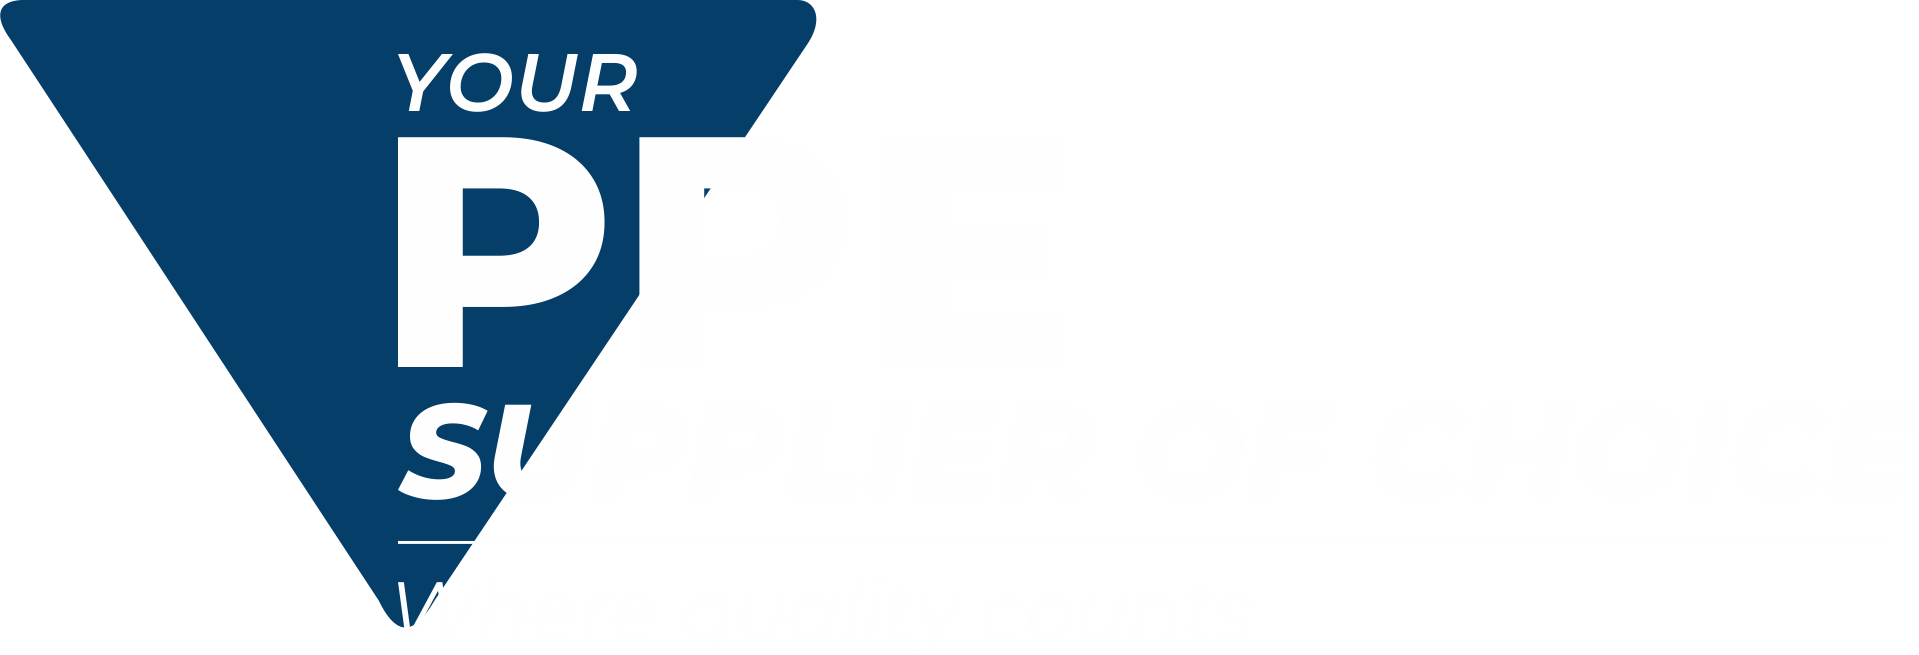 Your PPE supplier of choice